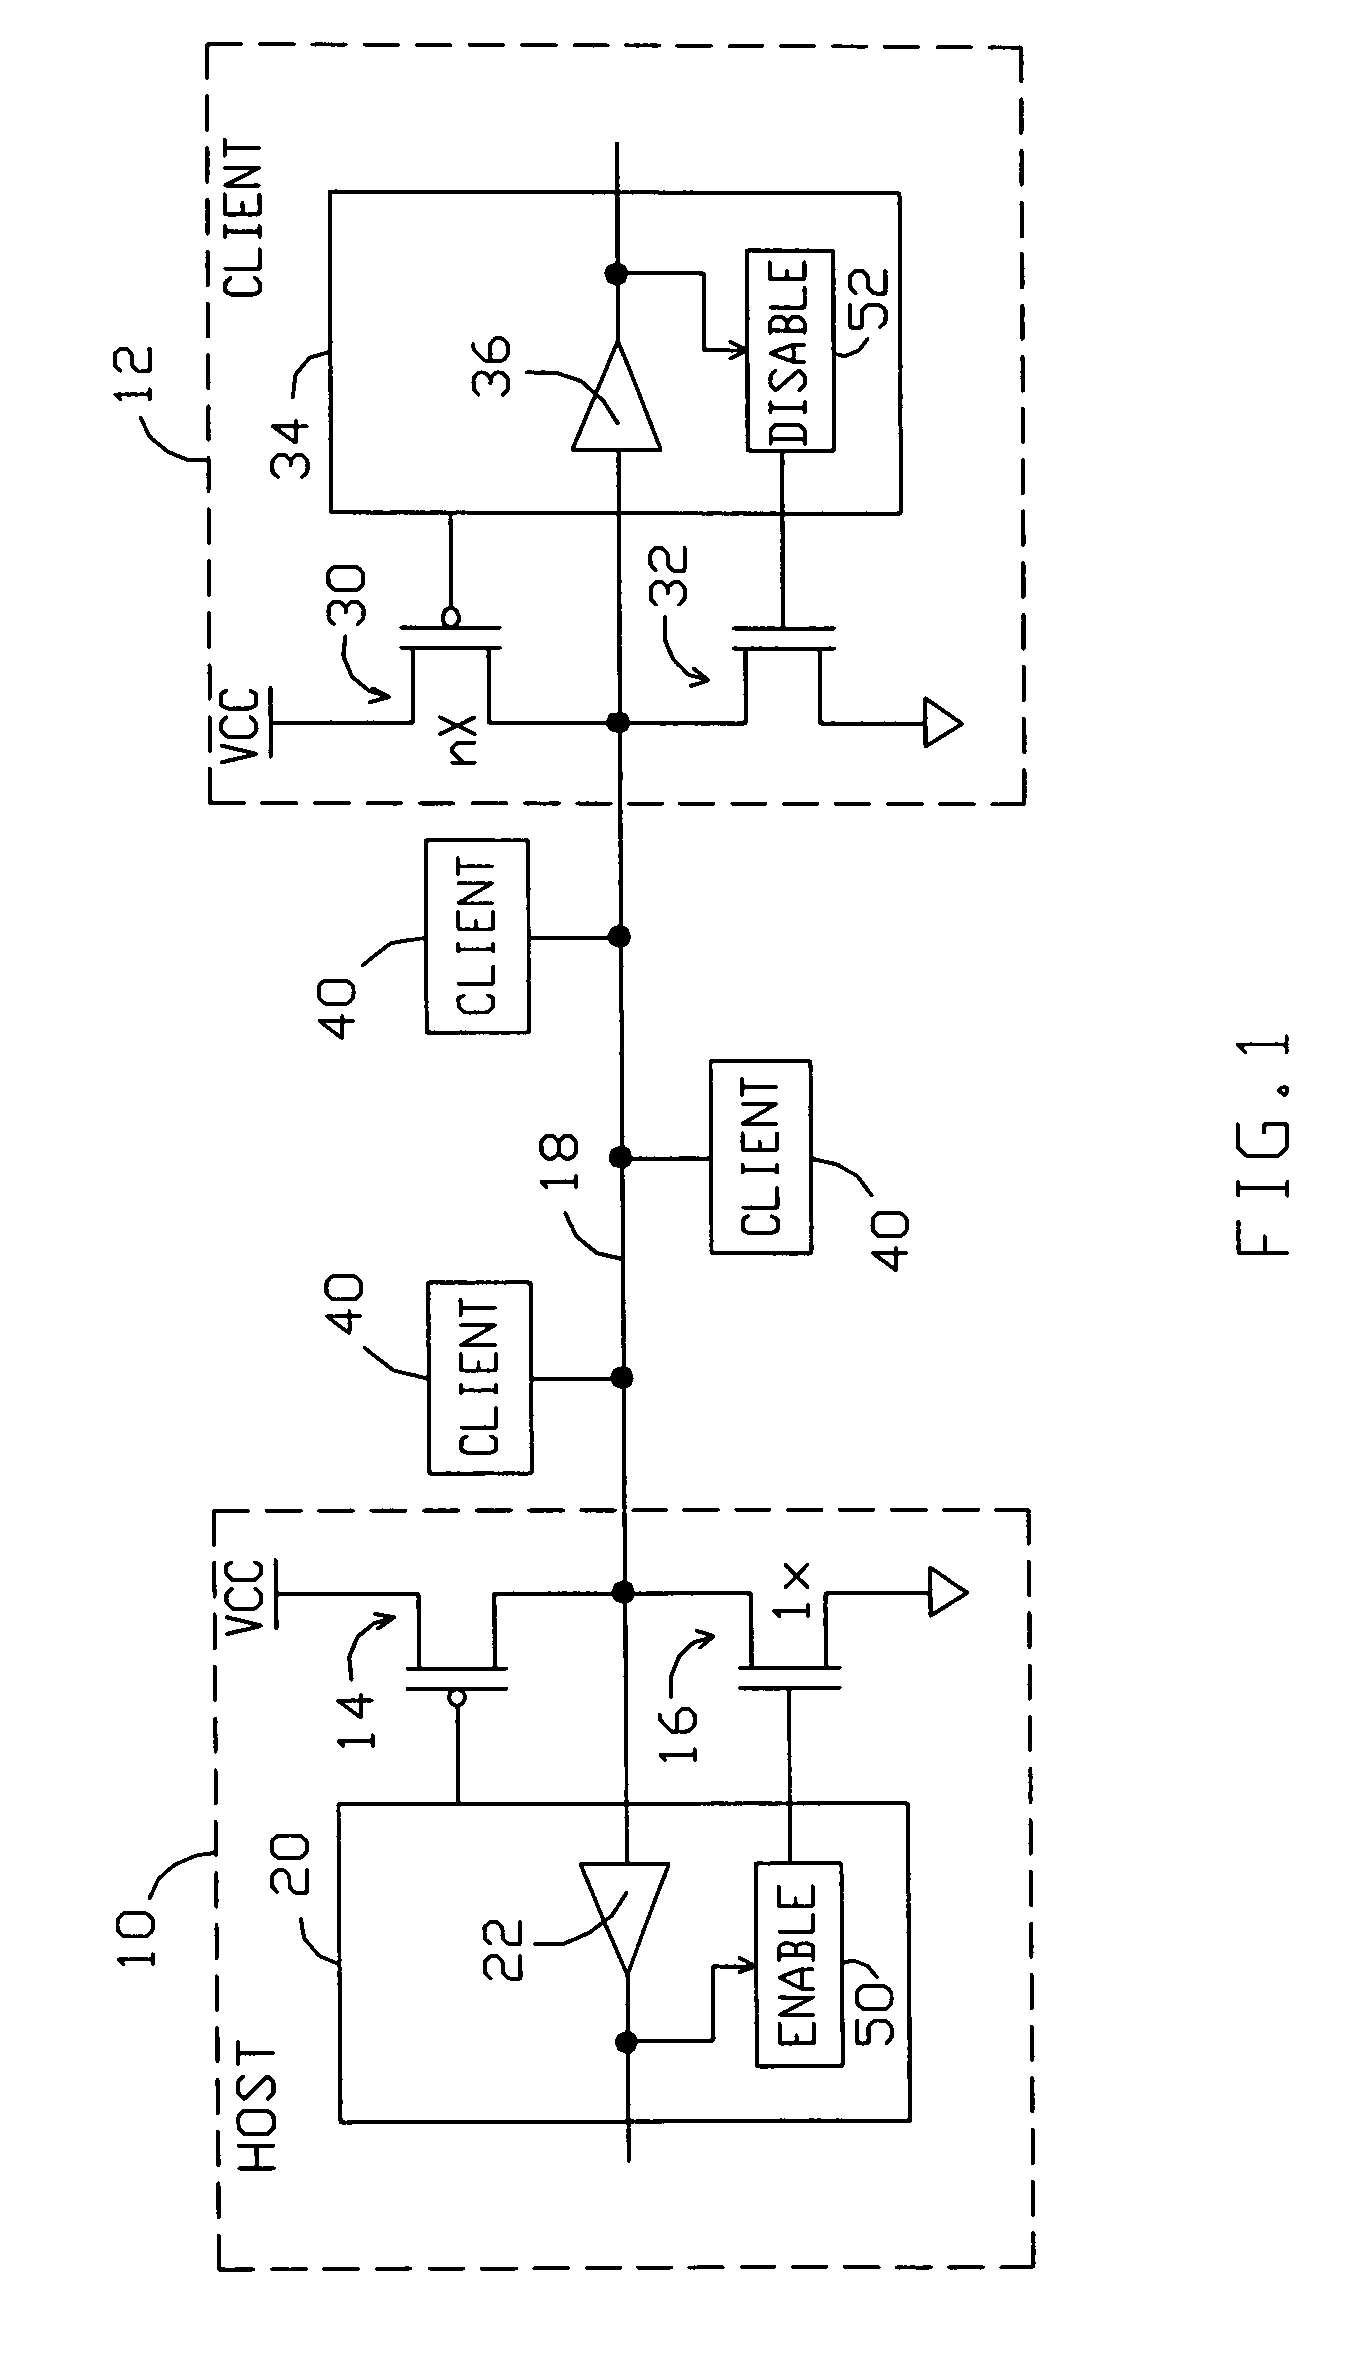 Single wire bus communication system with method for handling simultaneous responses from multiple clients